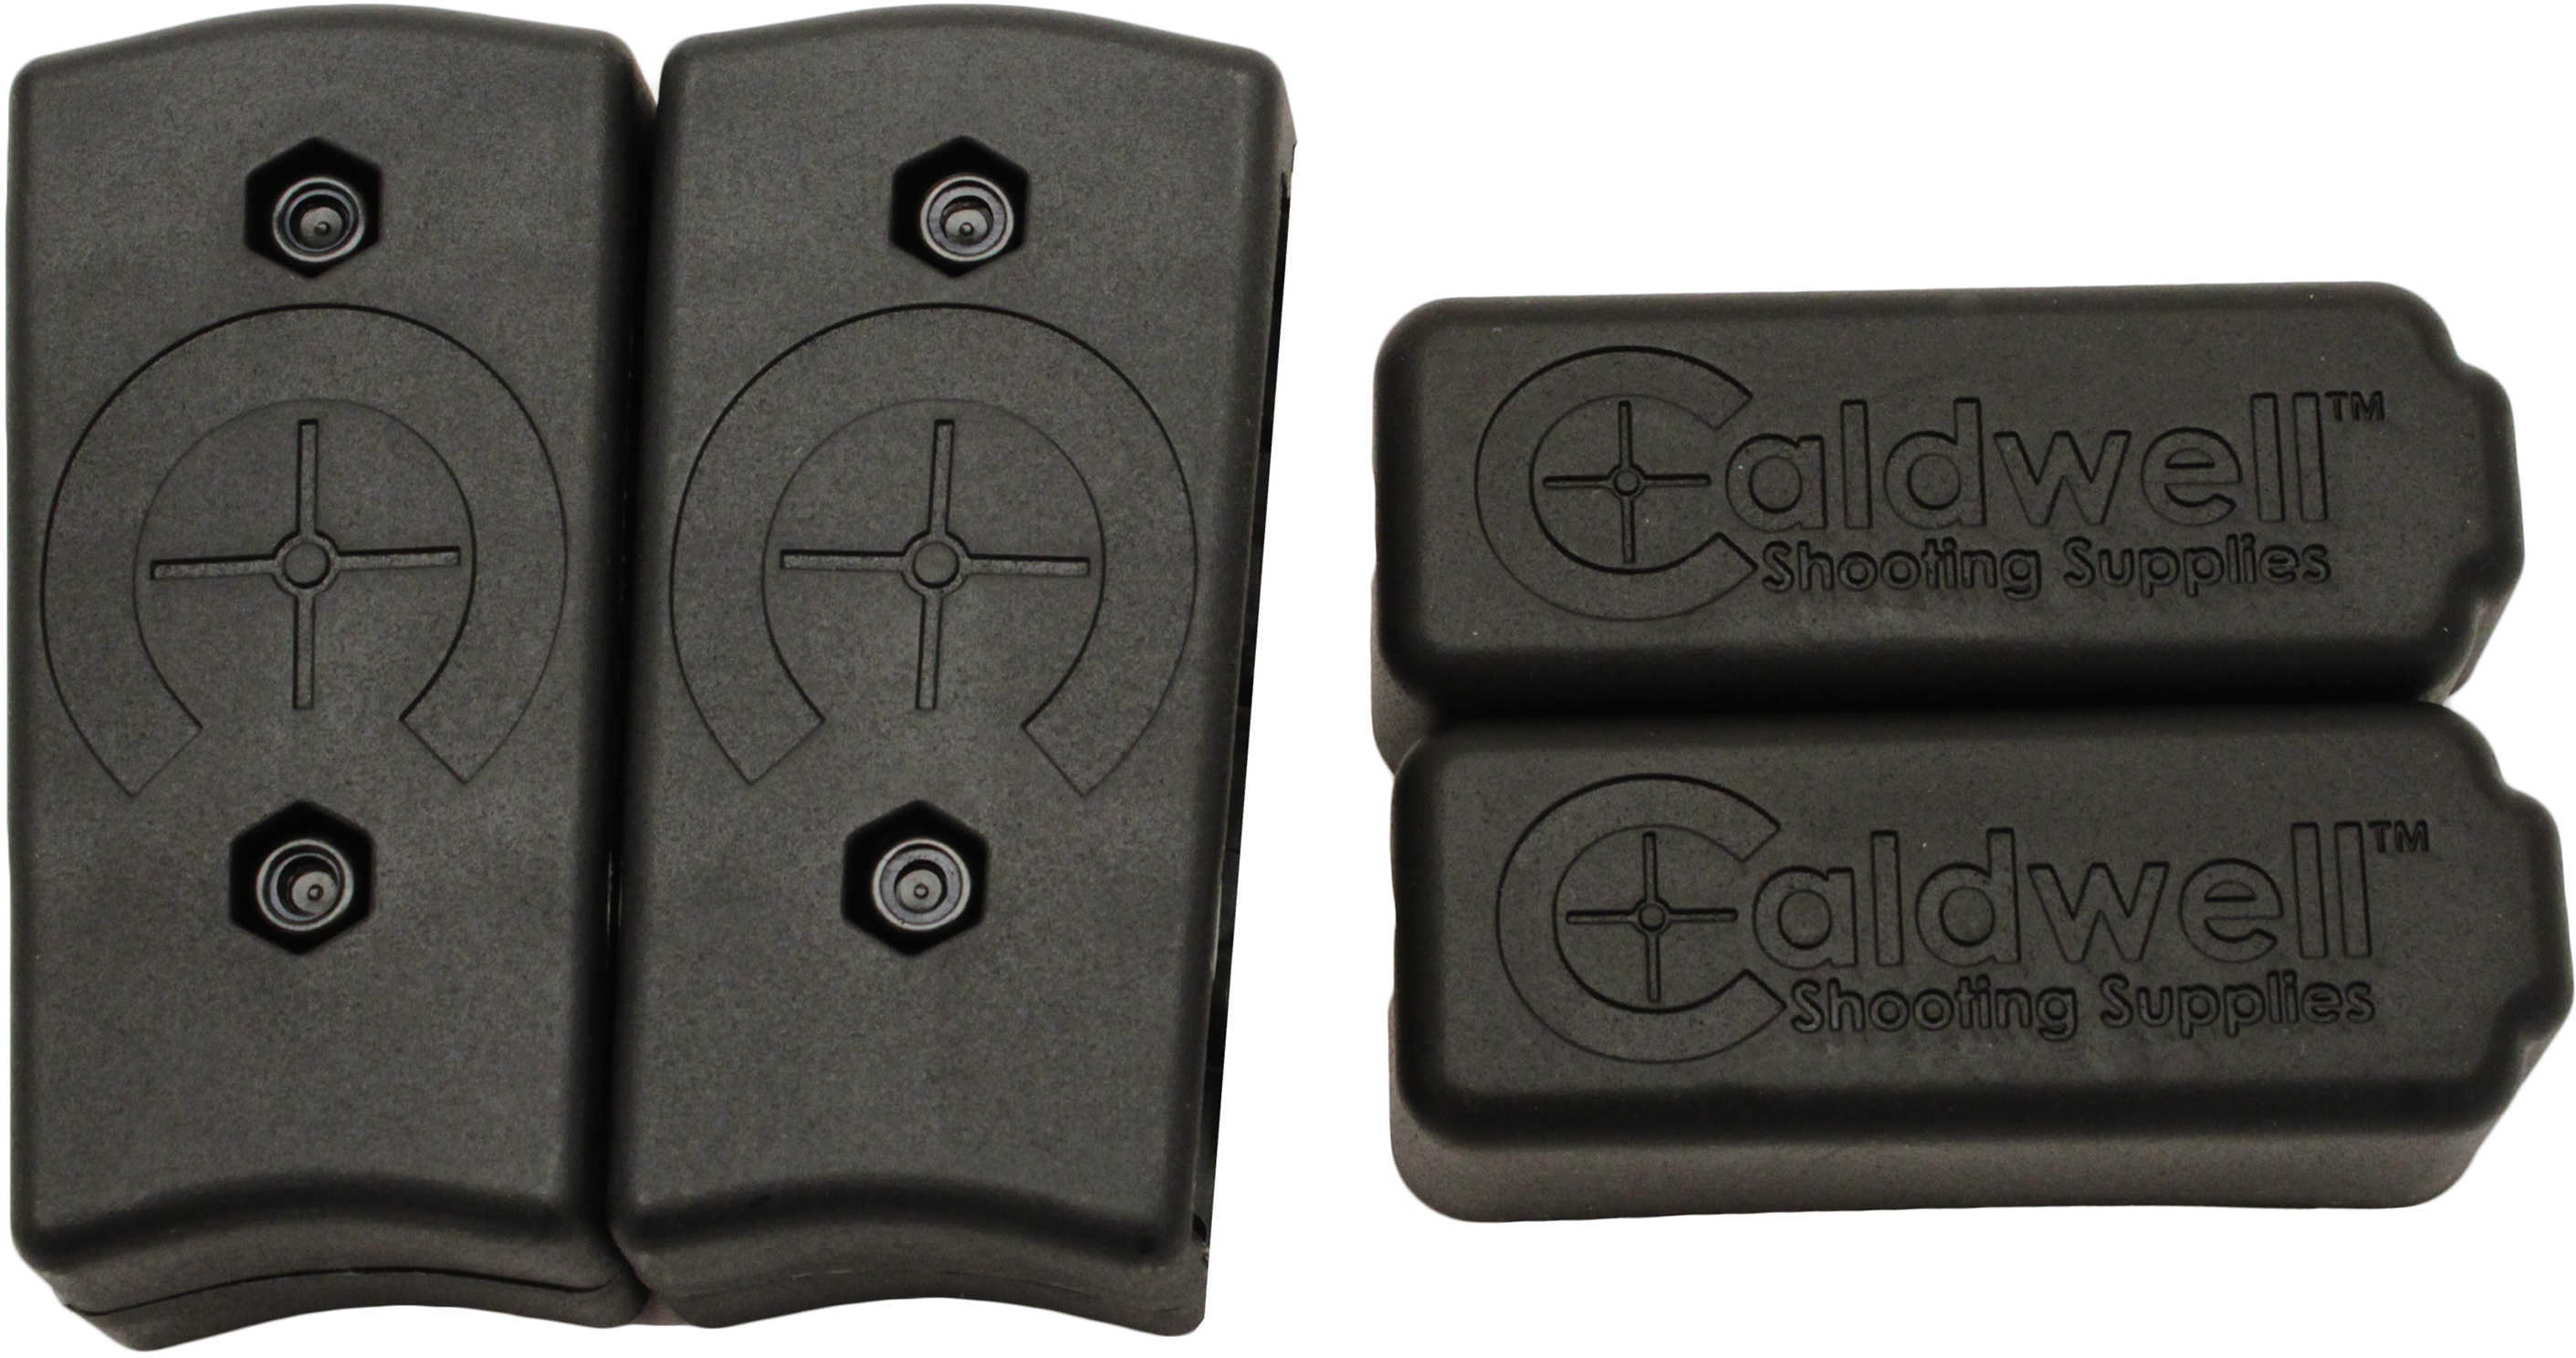 Caldwell AR-15 Mag Coupler Magazine Black Joins 2 Mil-Spec 10 Rounds Mags 2Pk 390504